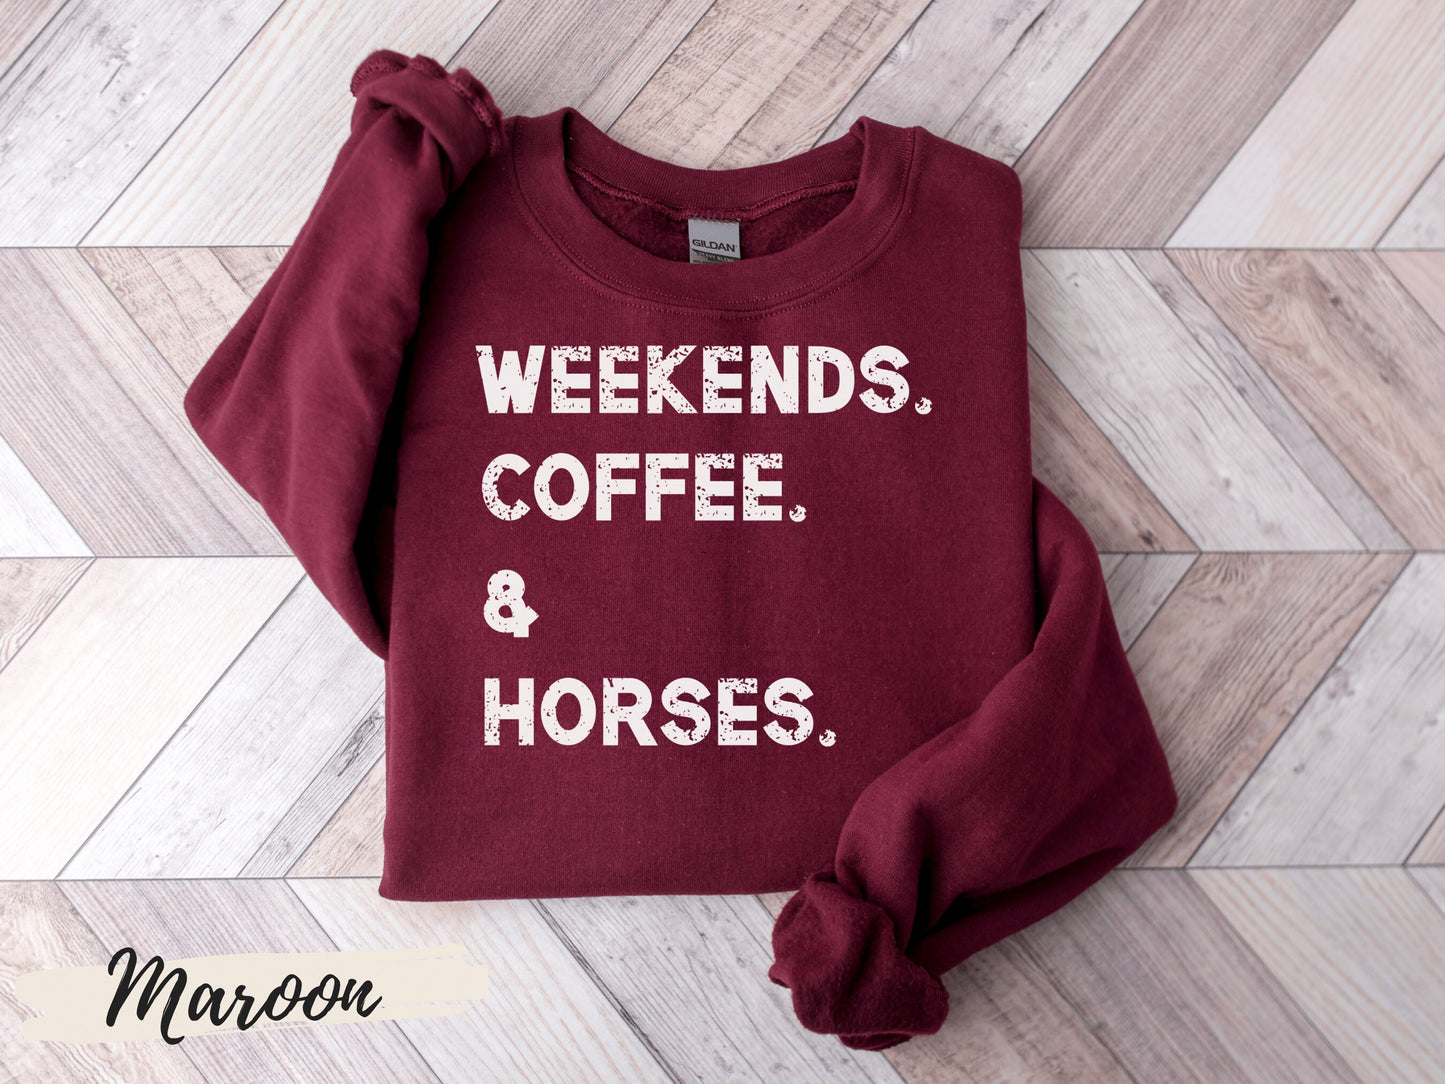 Weekends, Coffee & Horses Sweatshirt, Horse Gifts, Horse Shirt, Horse Sweatshirt, Sweaters for Women, Gift for Horse Lover, Horse Shirts